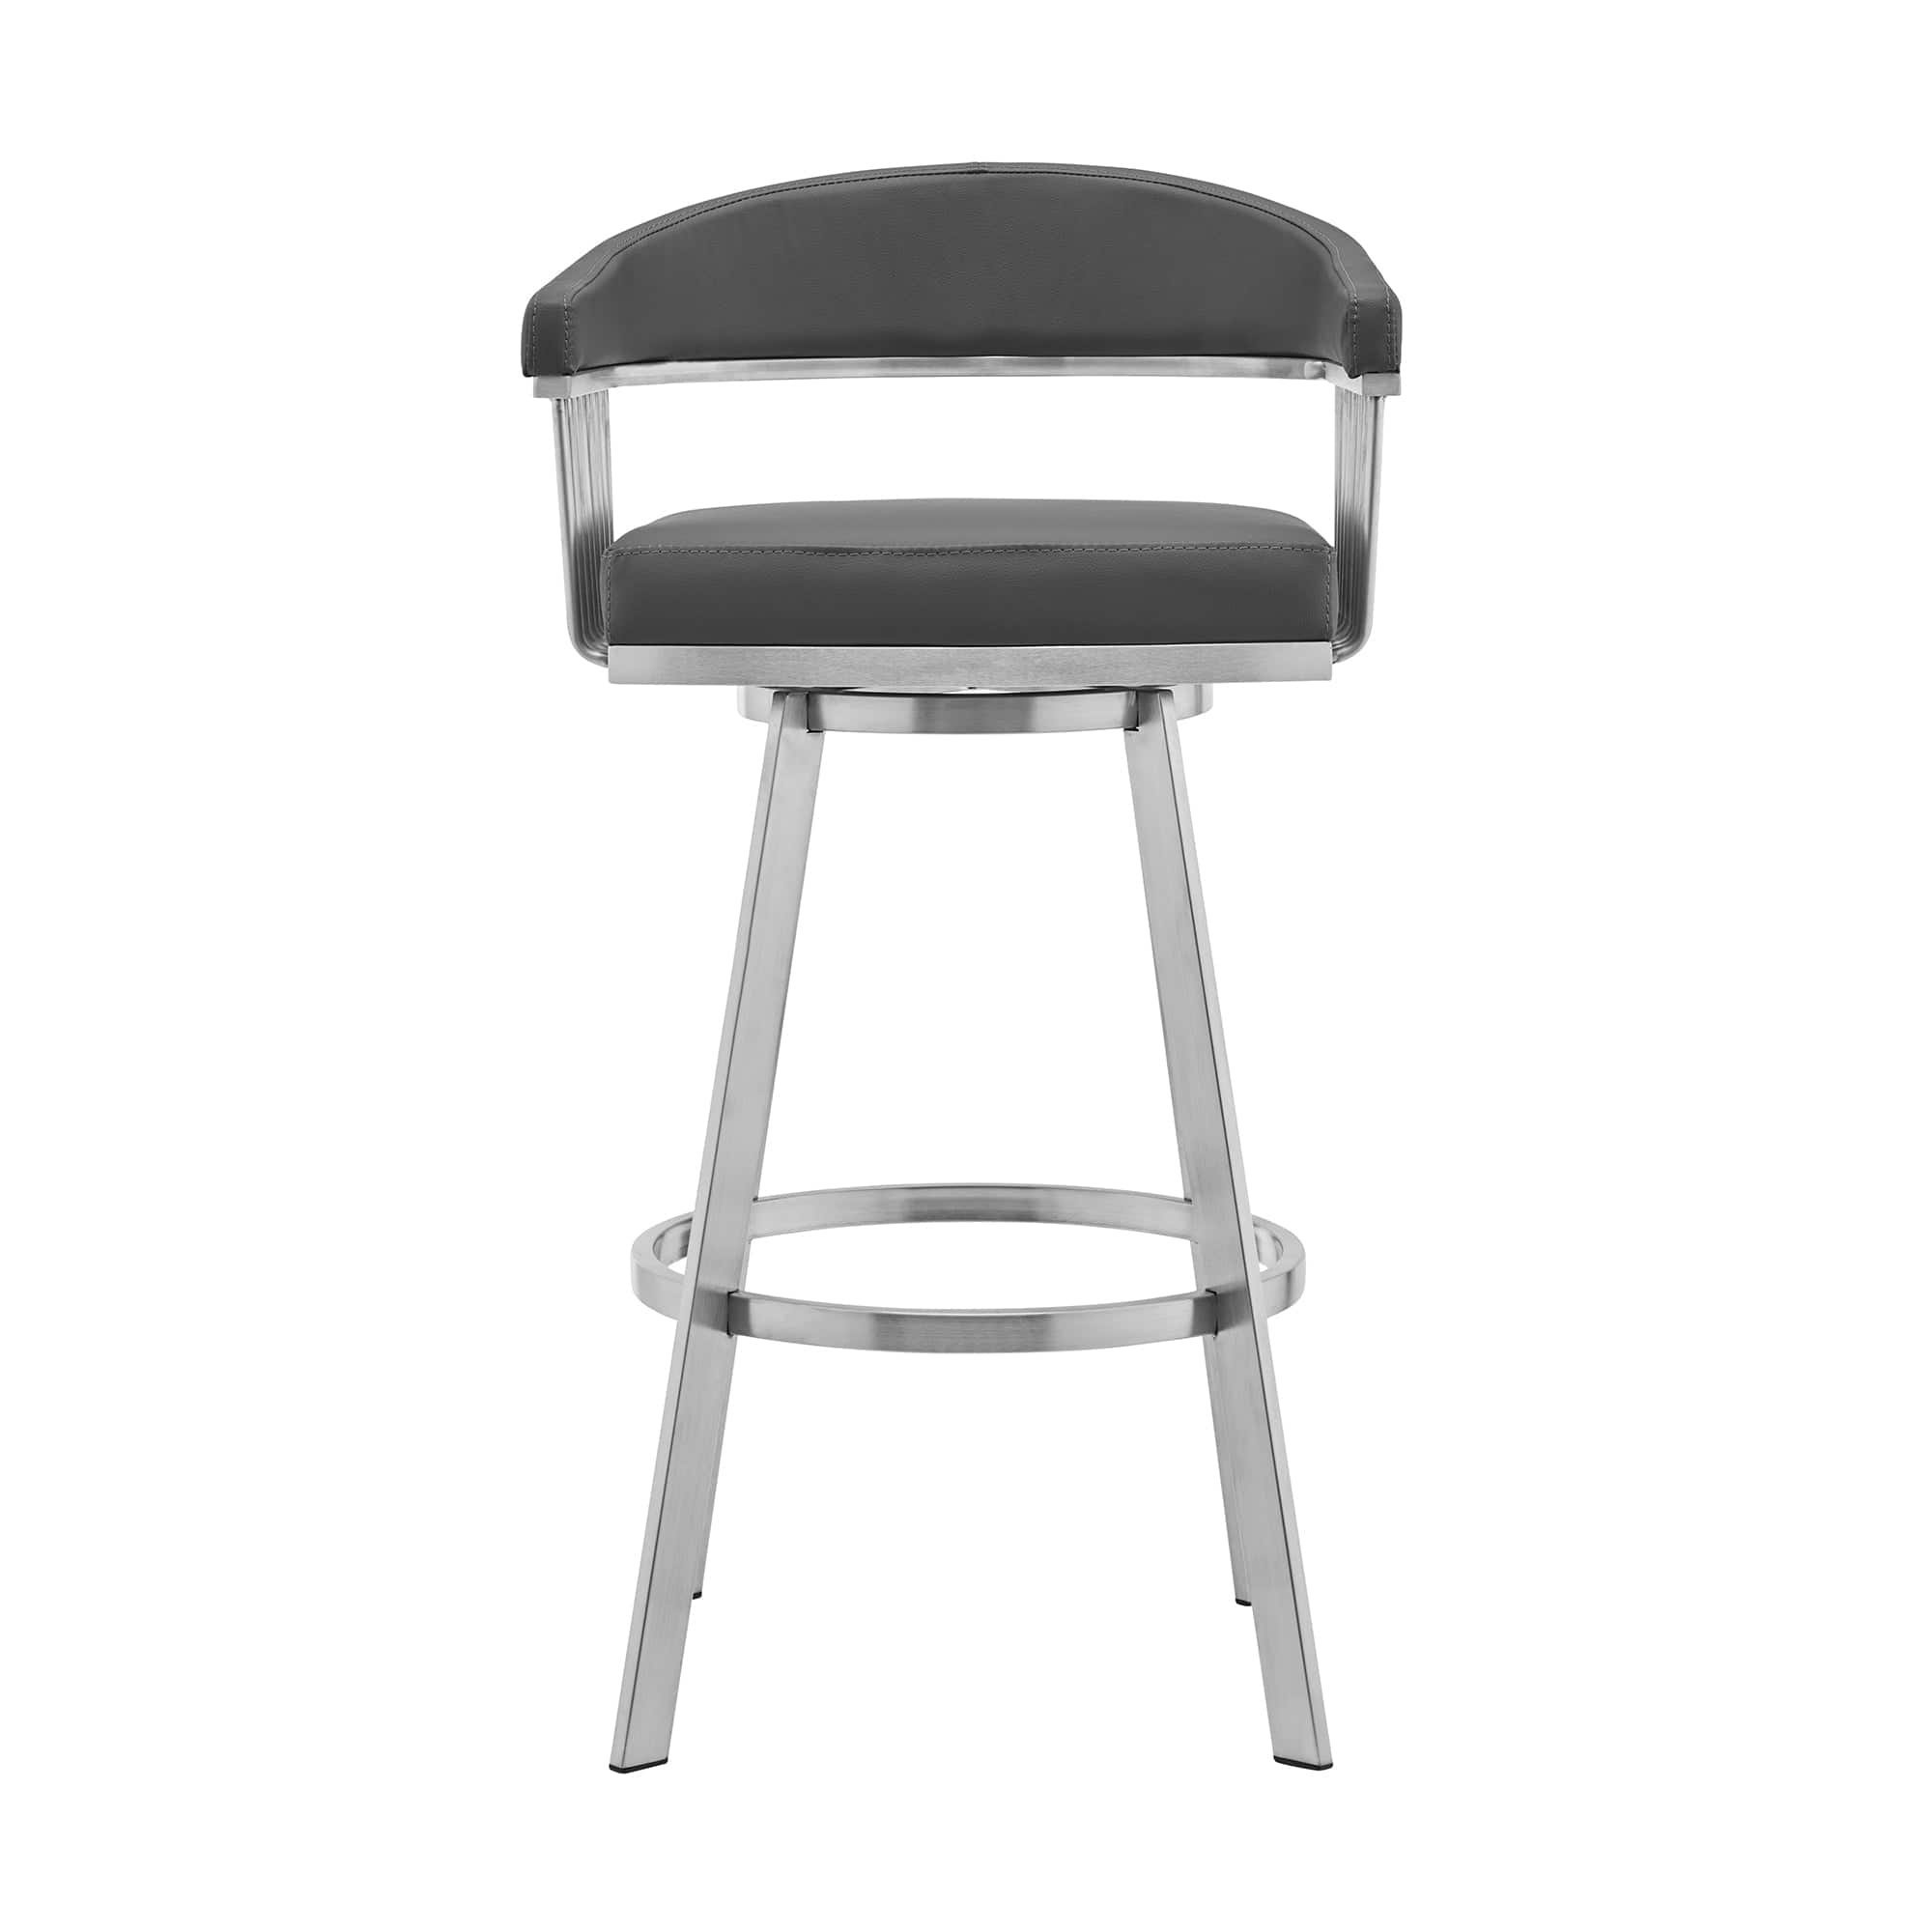 Armen Living Barstool Armen Living - Chelsea 30" Bar Height Swivel Bar Stool in Silver finish and White Faux Leather | LCCSBASLWH30